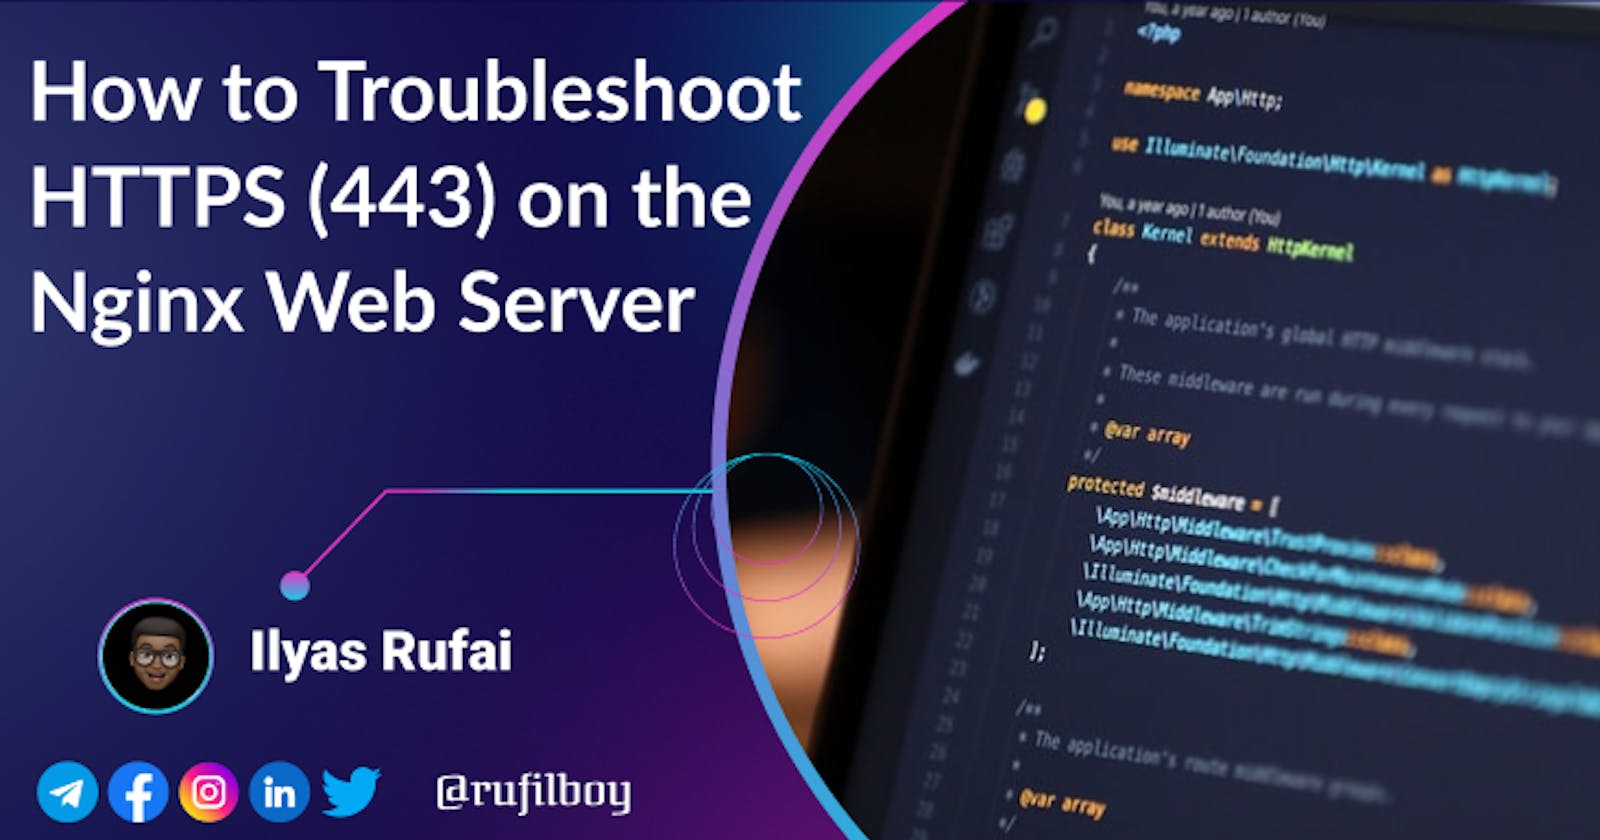 How to Troubleshoot HTTPS (443) on the Nginx Web Server